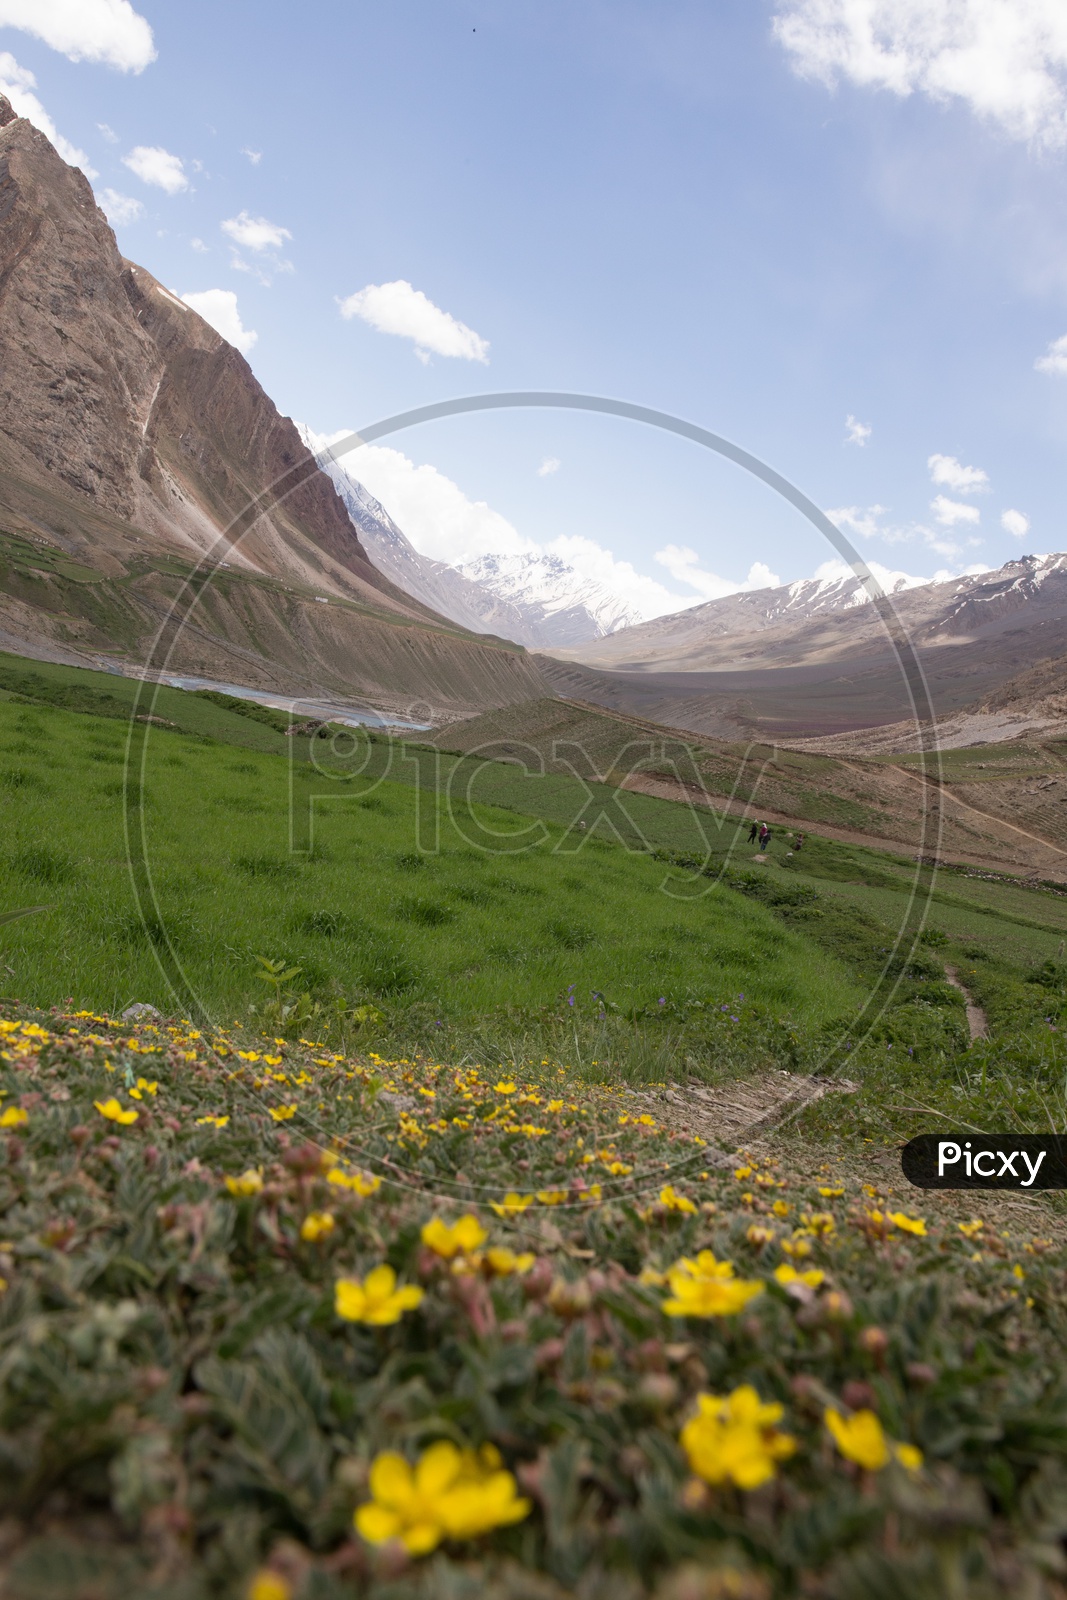 A View of River Valleys With Snow Capped Mountains and Sedimentary Hills From The Step Wise Cultivation Fields in The Villages Of Spiti Valley